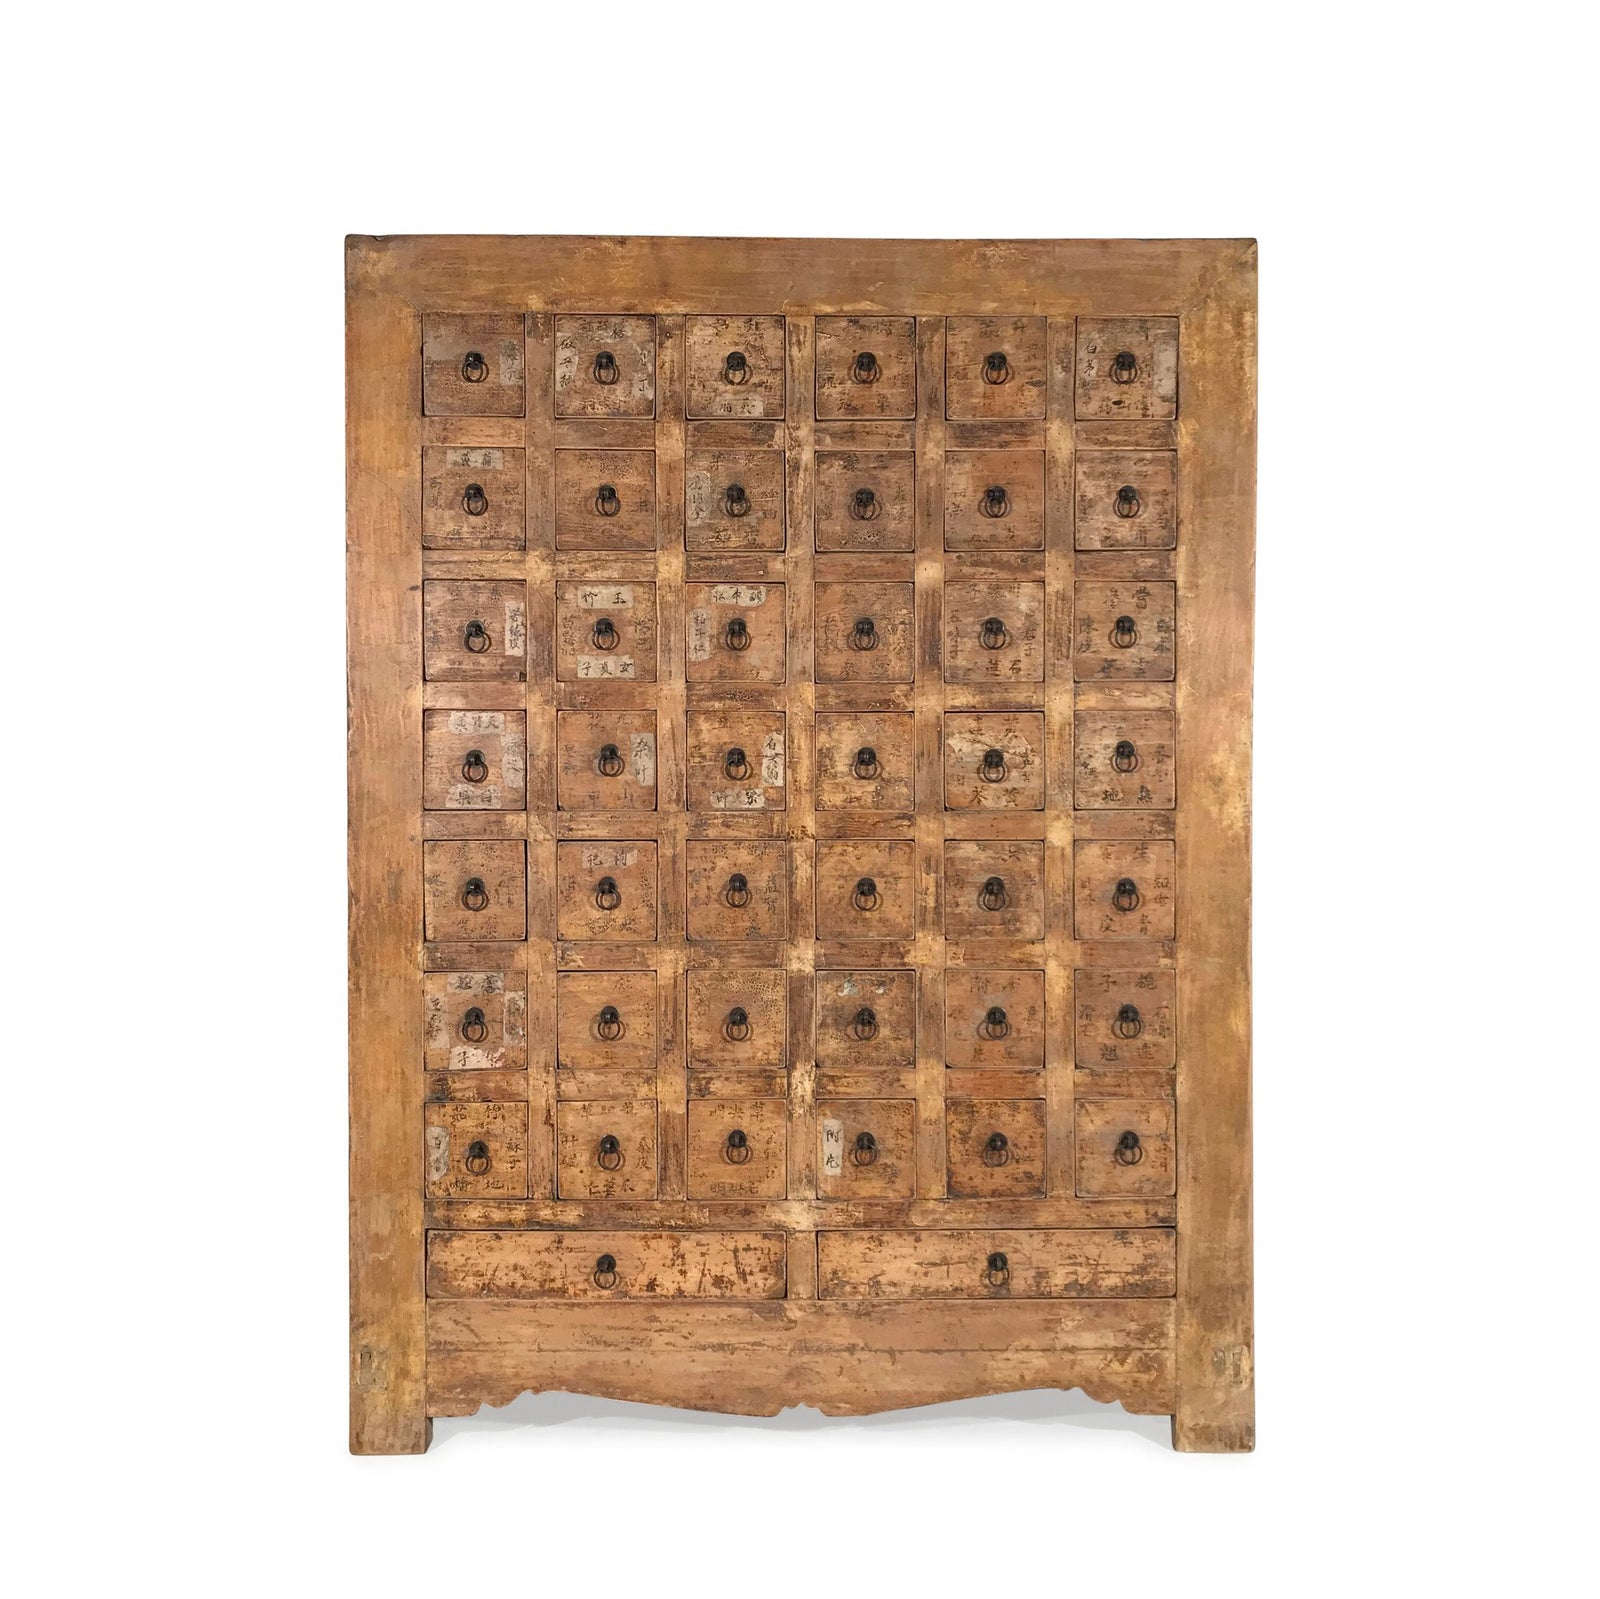 Apothecary Chest From Hebei Province - 19thC - 108 x 43 x 145 (wxdxh cms) - C1565